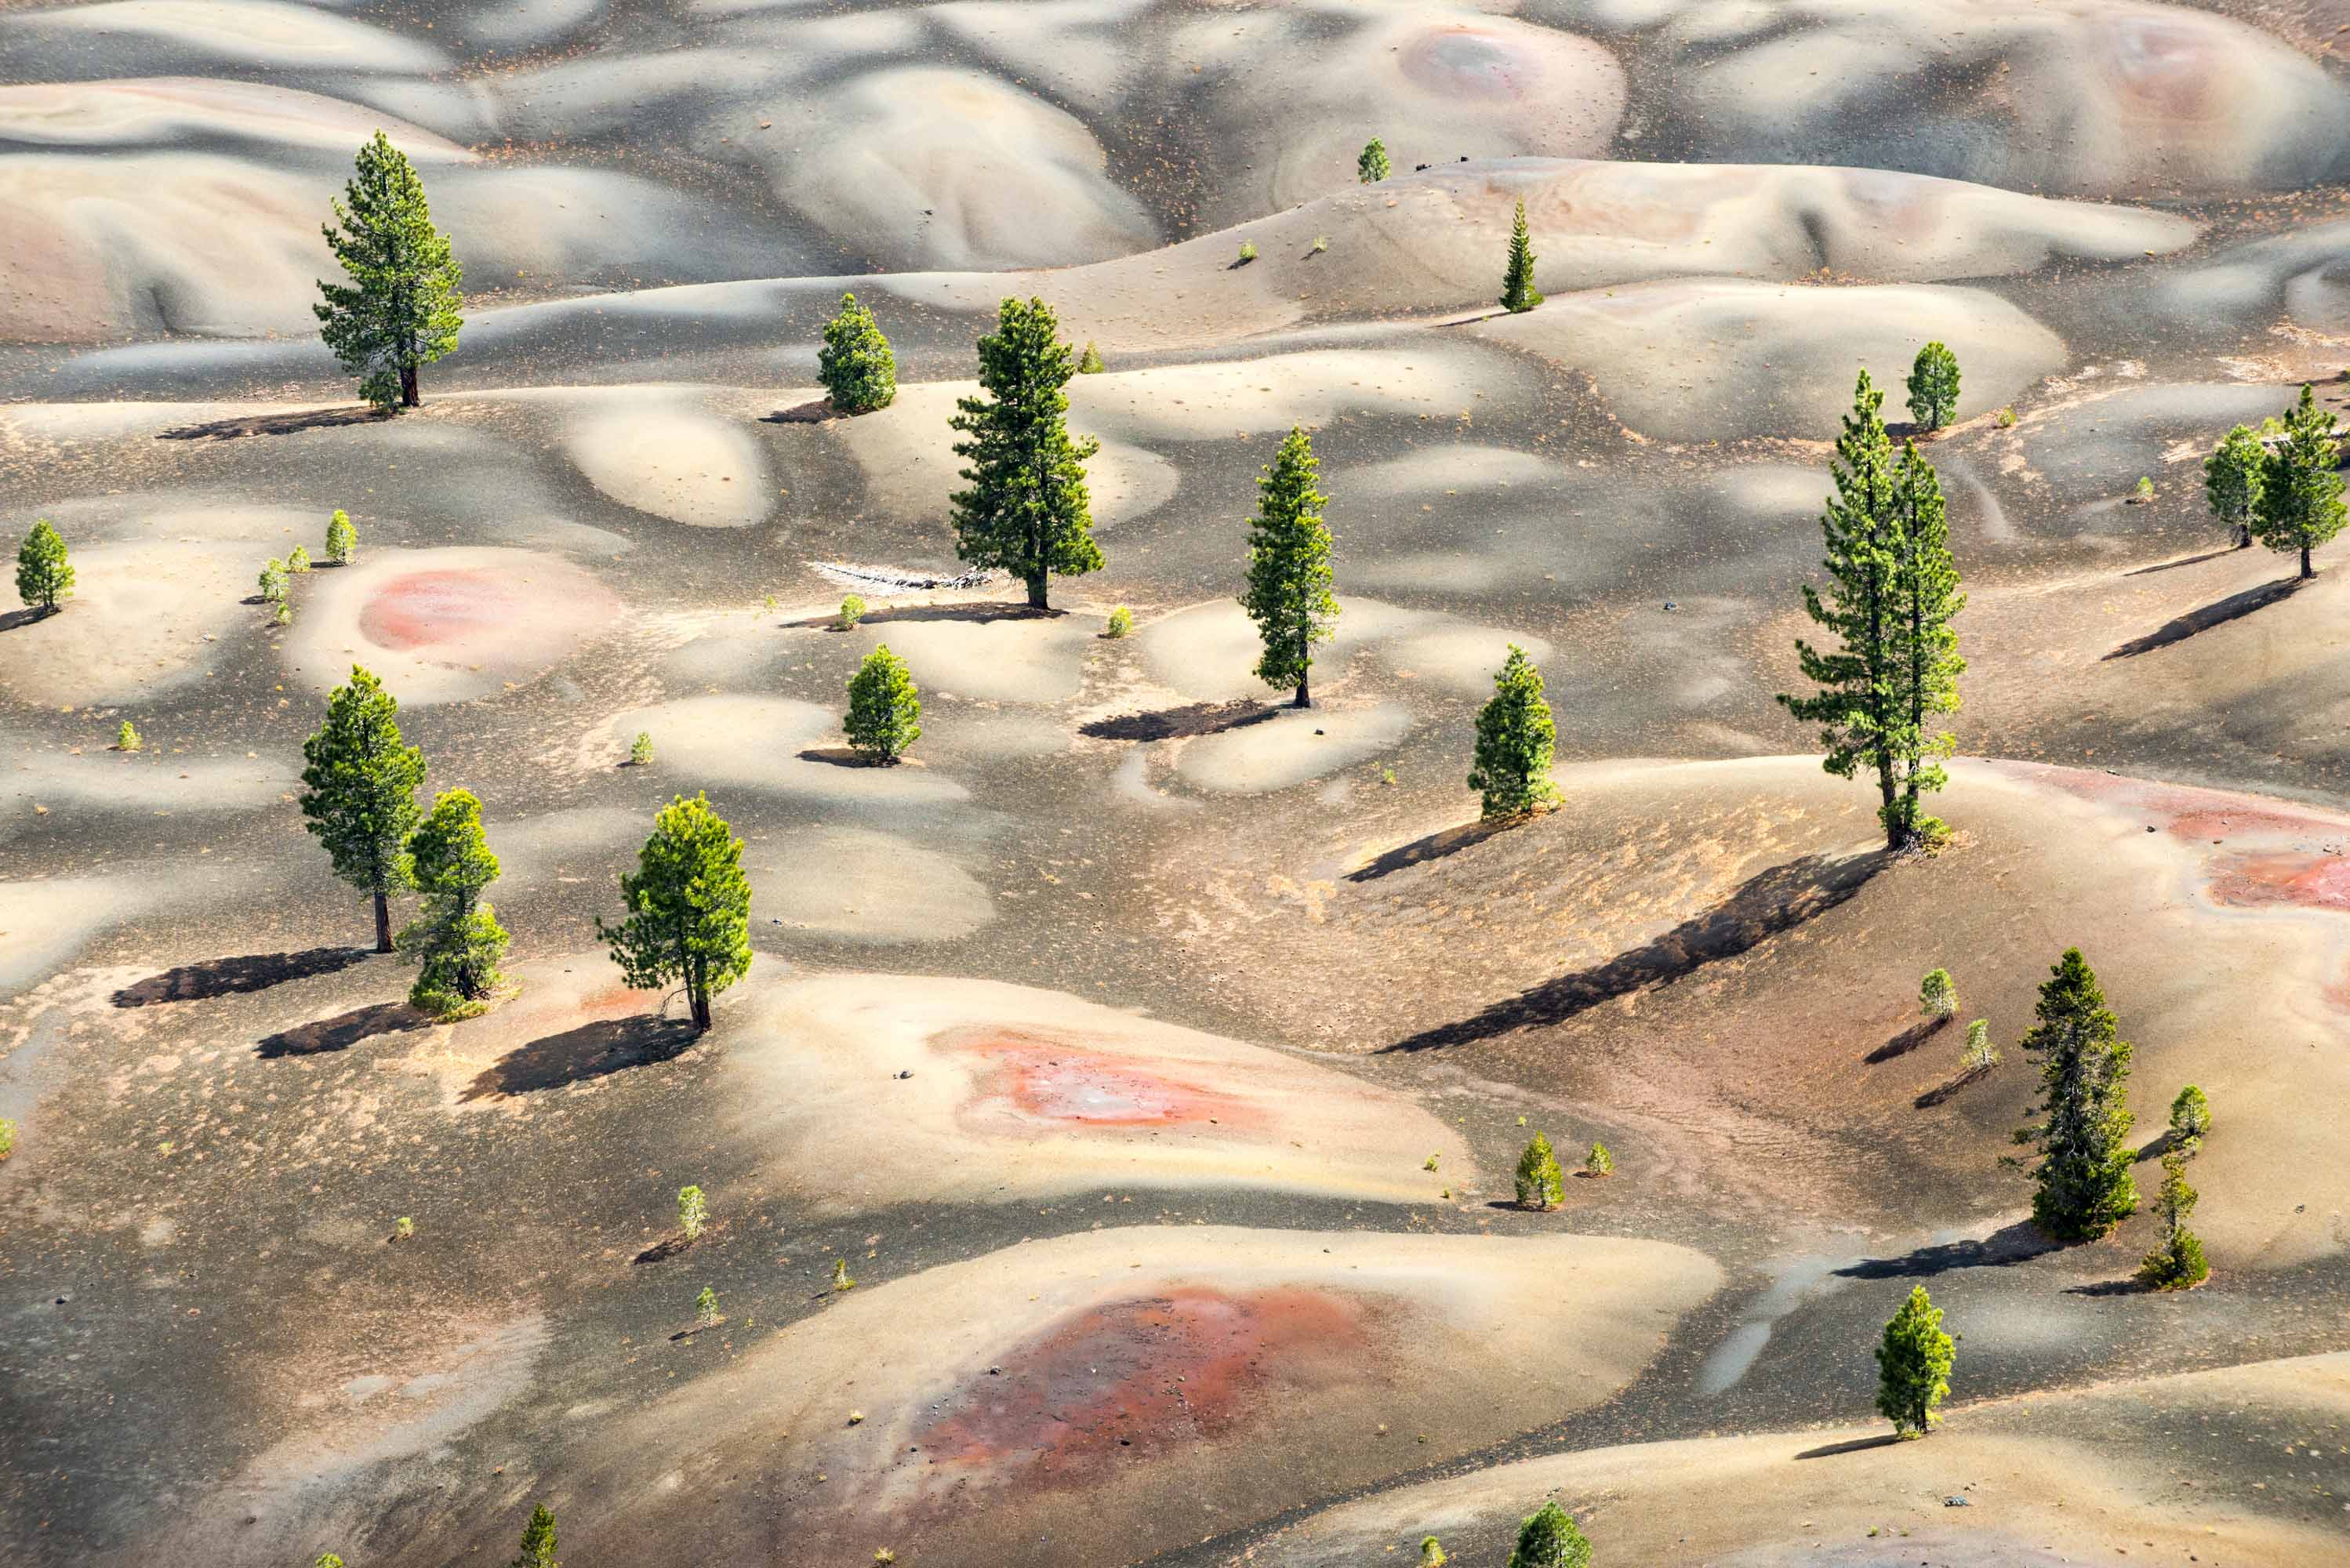 Painted Dunes from Cinder Cone volcano in Lassen Volcanic National Park, California.